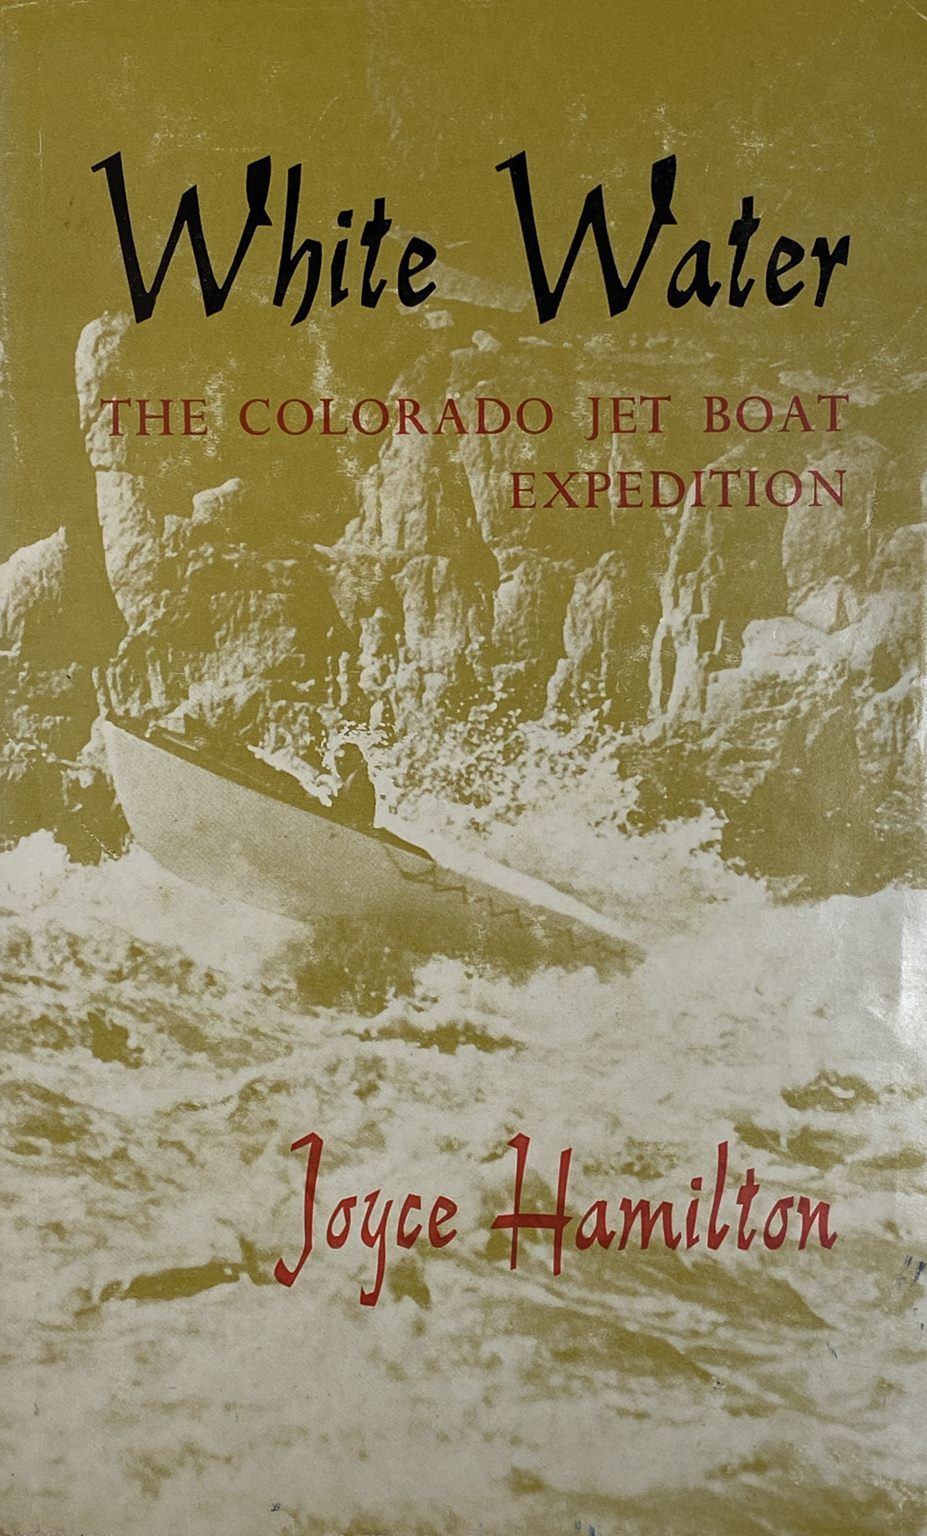 WHITE WATER: The Colorado Jet Boat Expedition